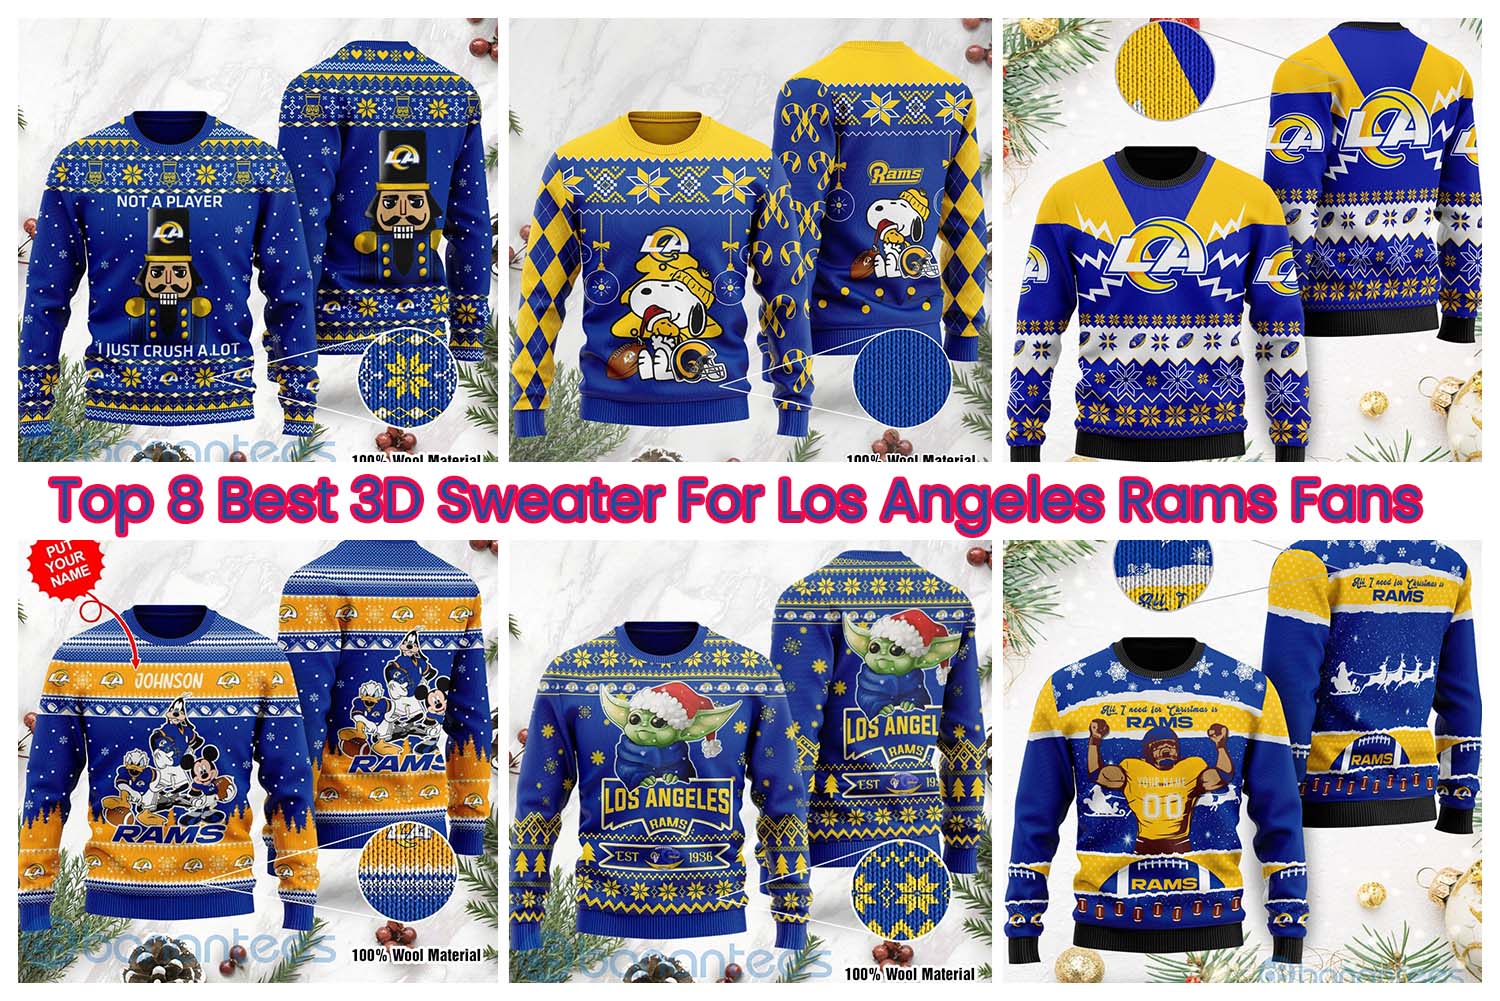 Top 8 Best 3D Sweater For Los Angeles Rams Fans